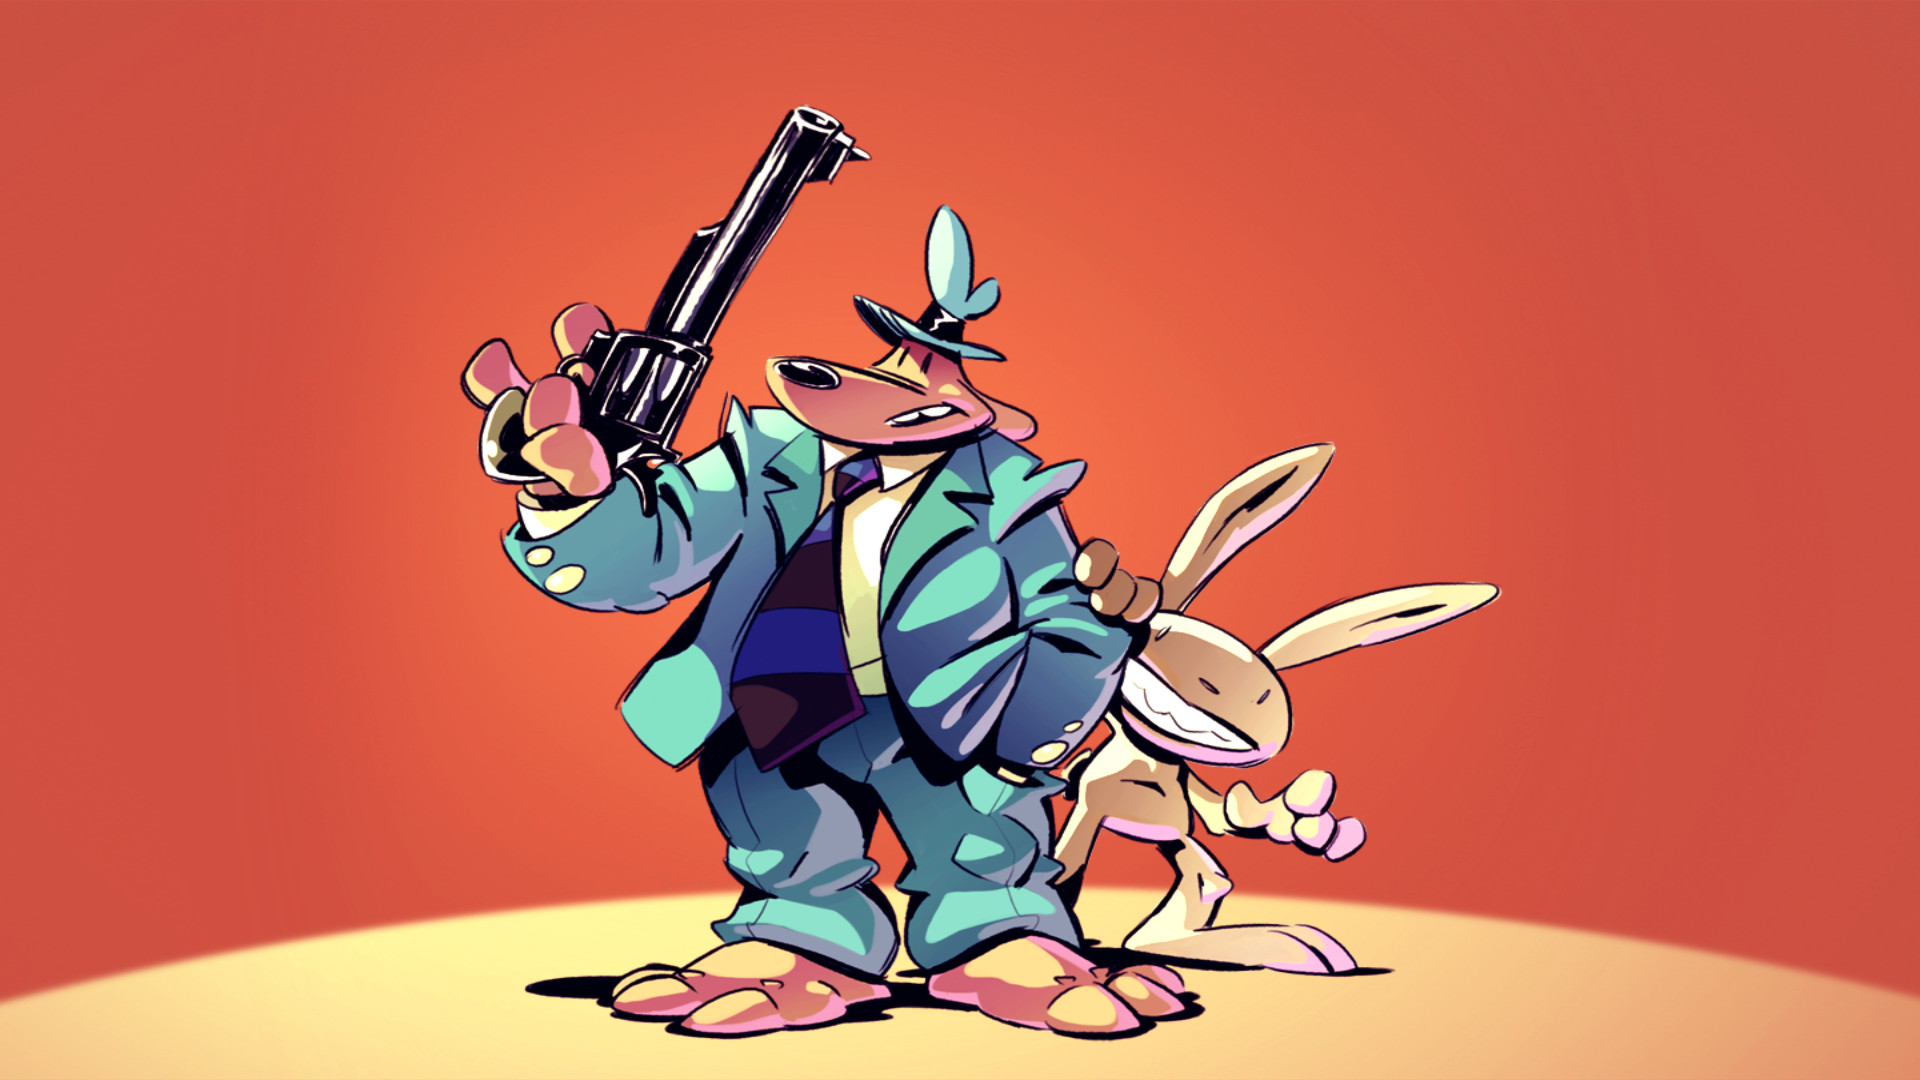 Sam & Max 103: The Mole, the Mob and the Meatball